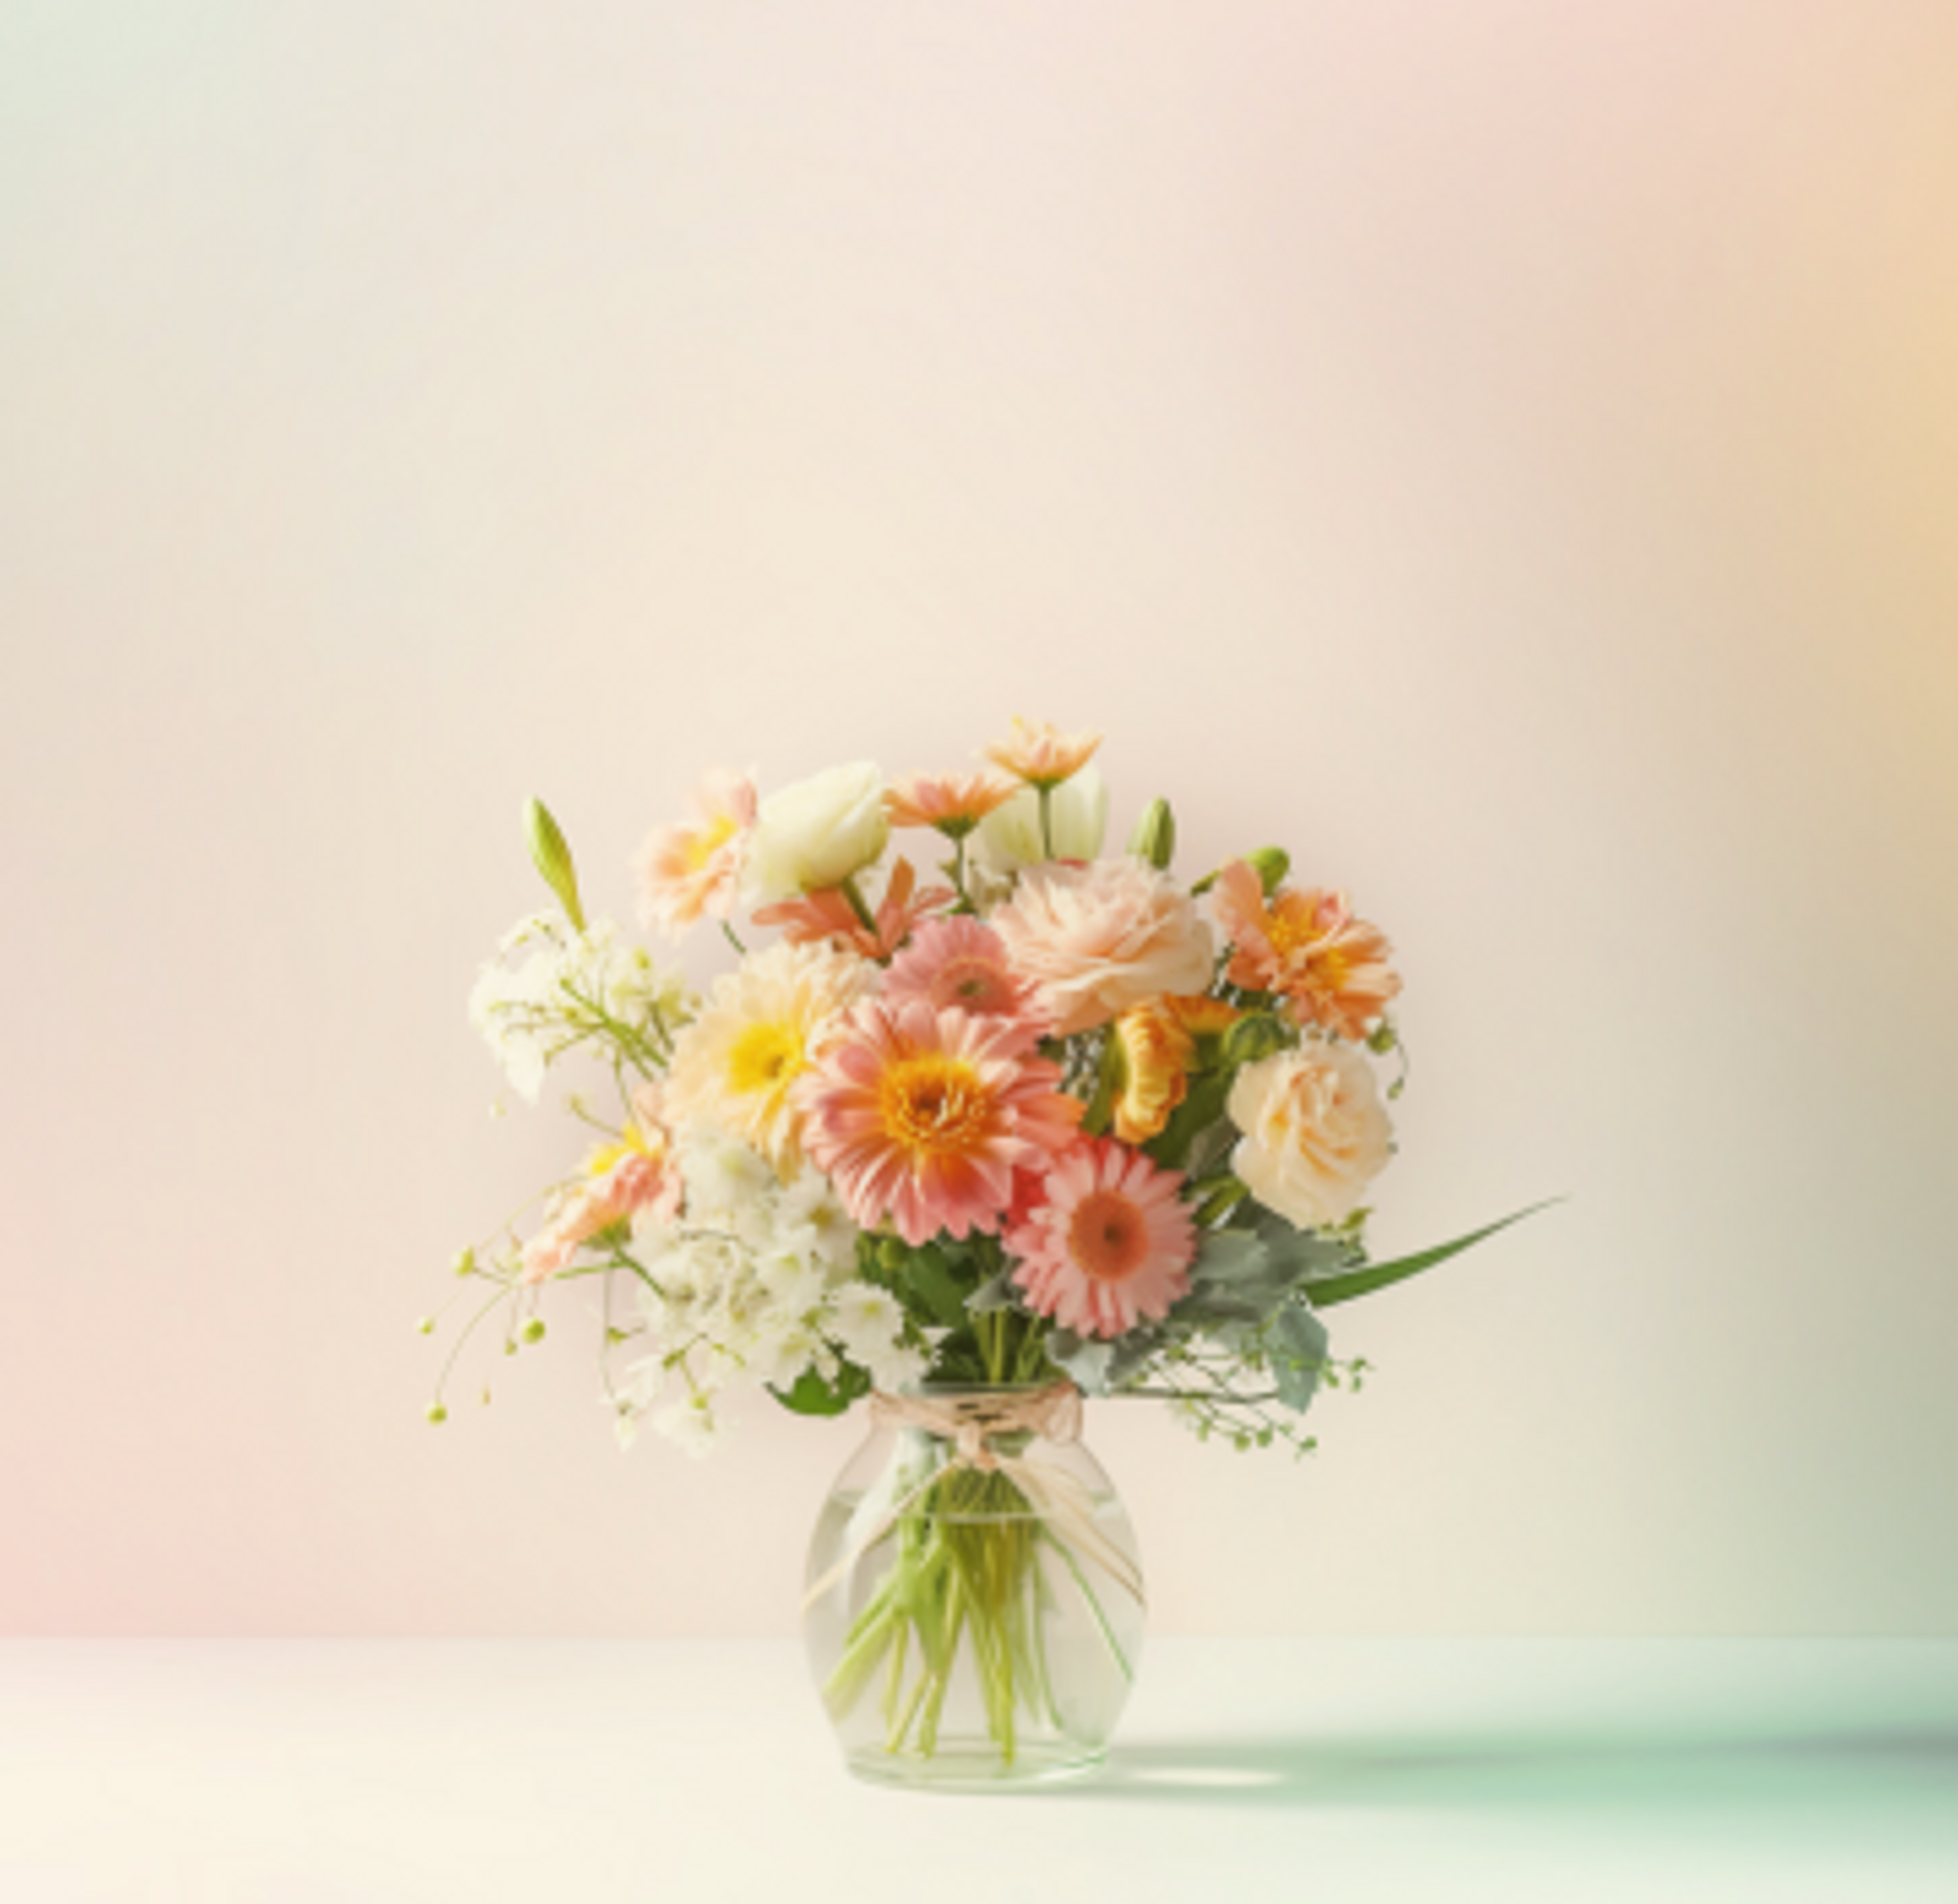 Light and bright flower arrangement in a clear vase in a sparse white and pastel background.